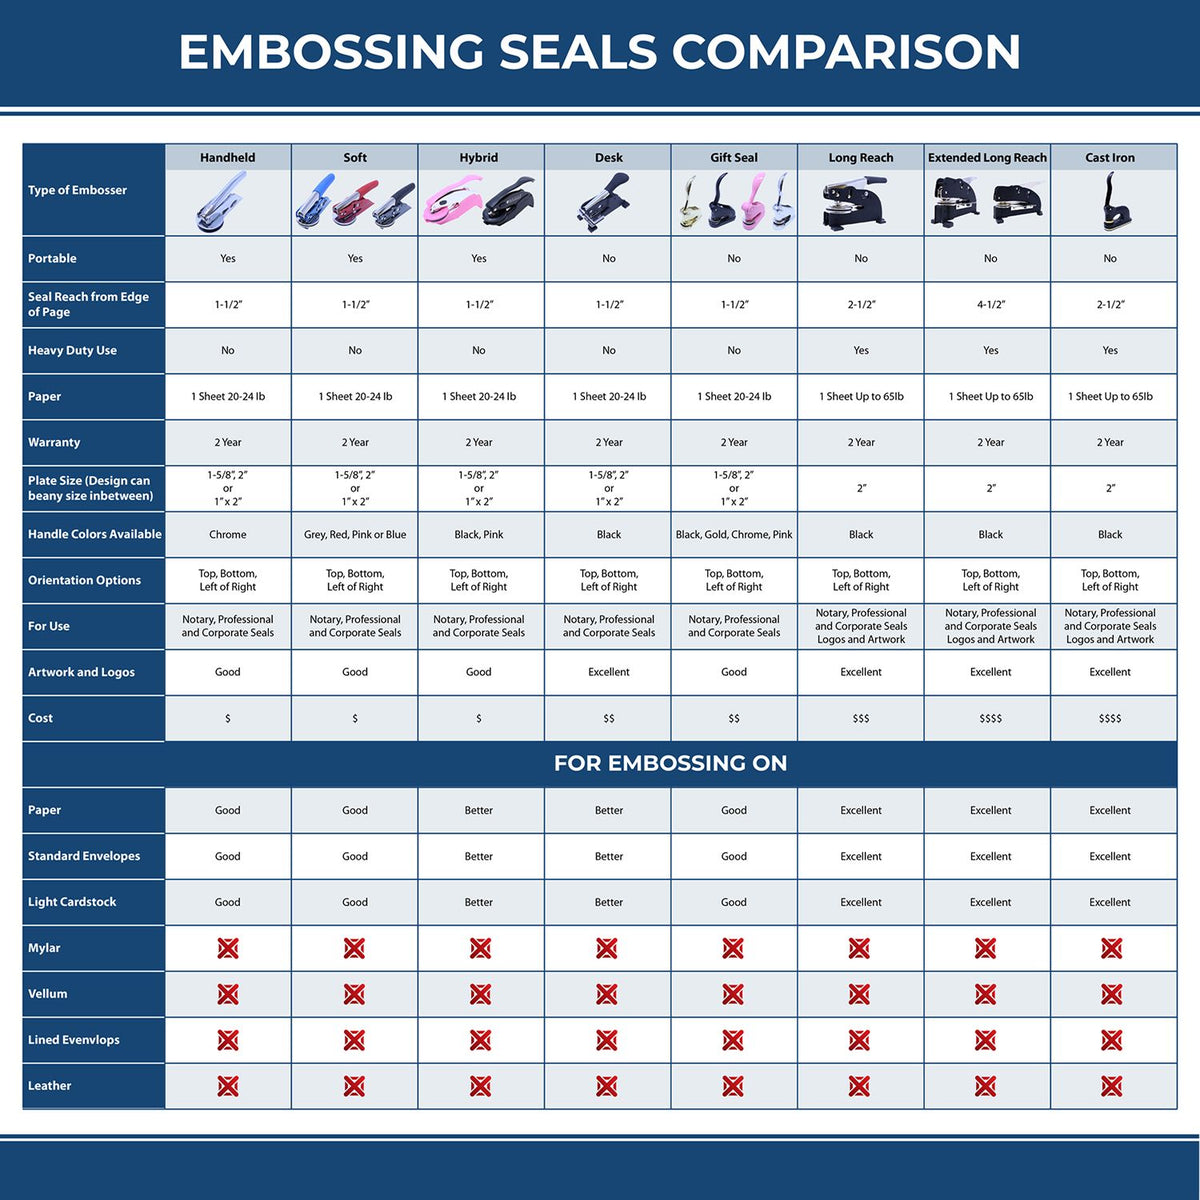 A comparison chart for the different types of mount models available for the Handheld New Mexico Professional Geologist Embosser